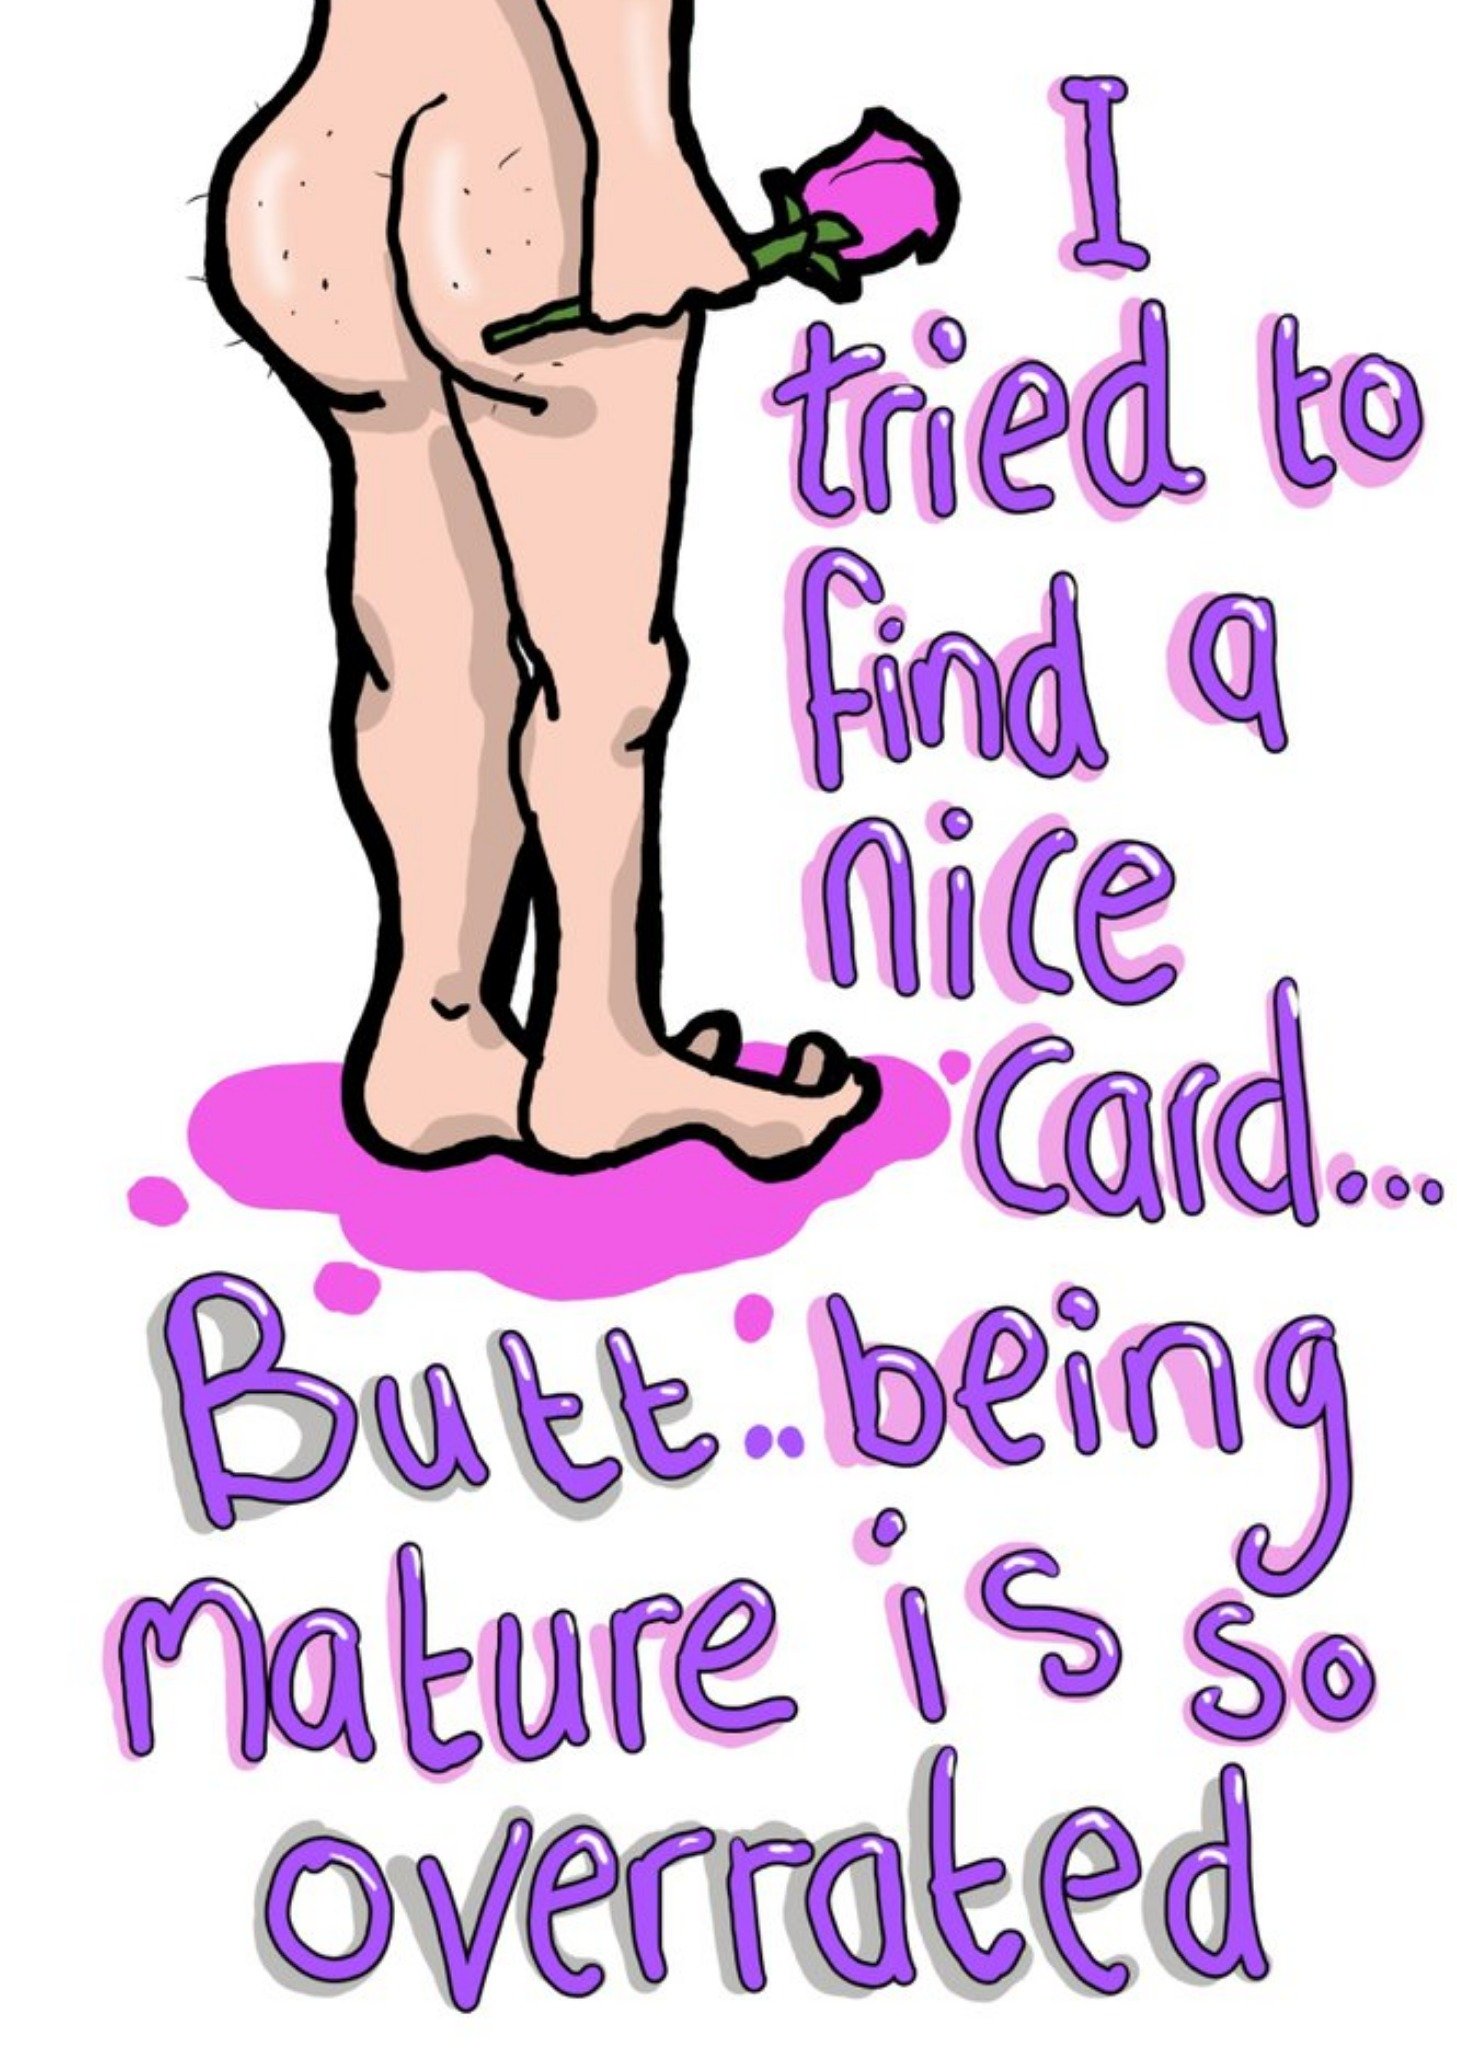 Moonpig Illustration Of A Naked Man Showing His Butt And Holding A Rose Cheeky Pun Valentine's Day C